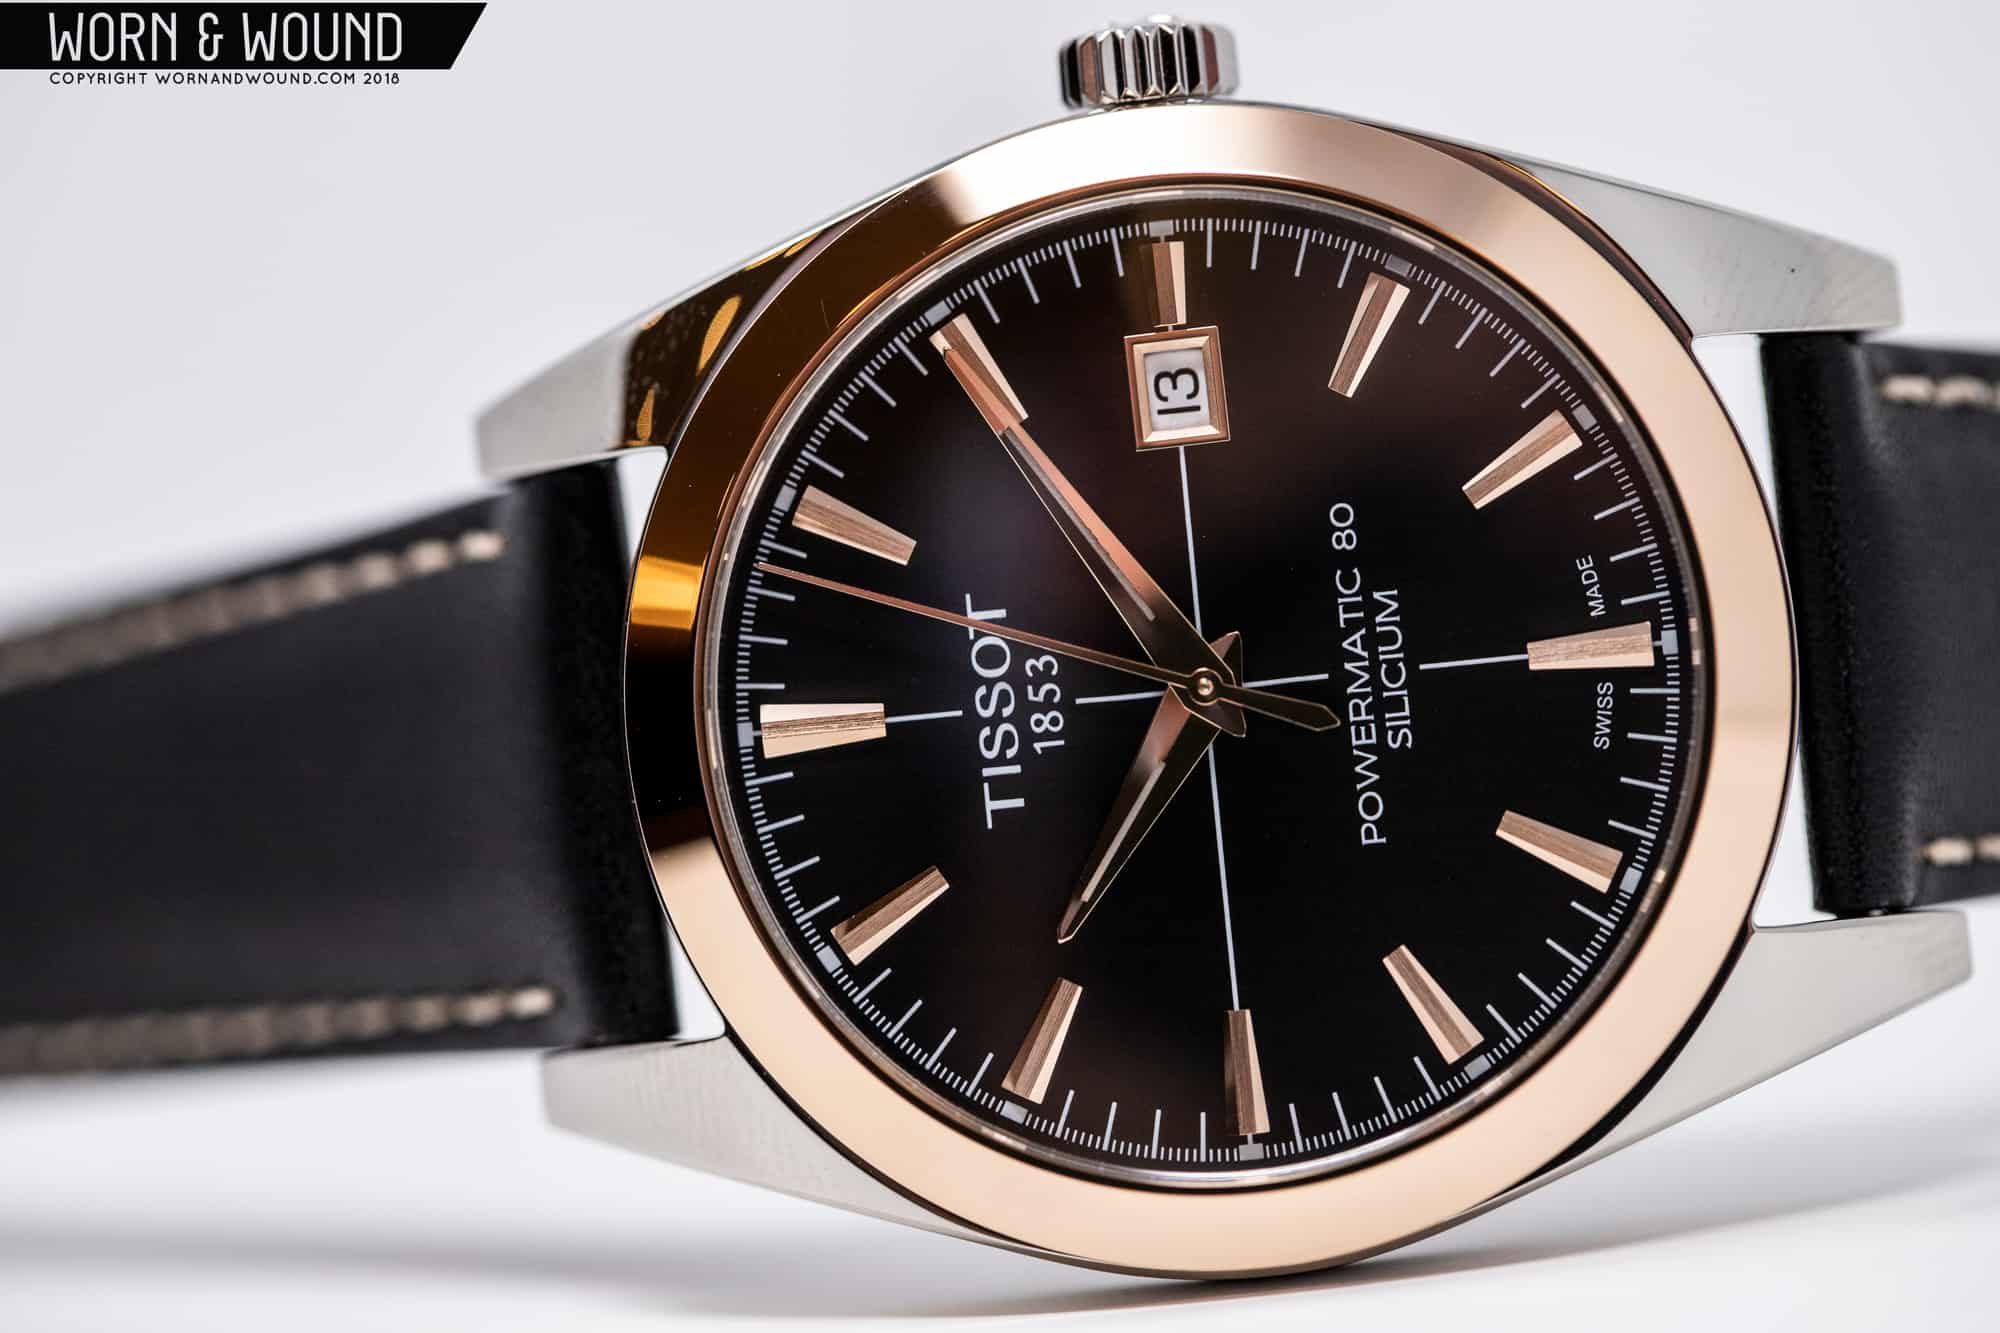 First Look: The Two-Tone Tissot Gentleman Offers an Incredible Value